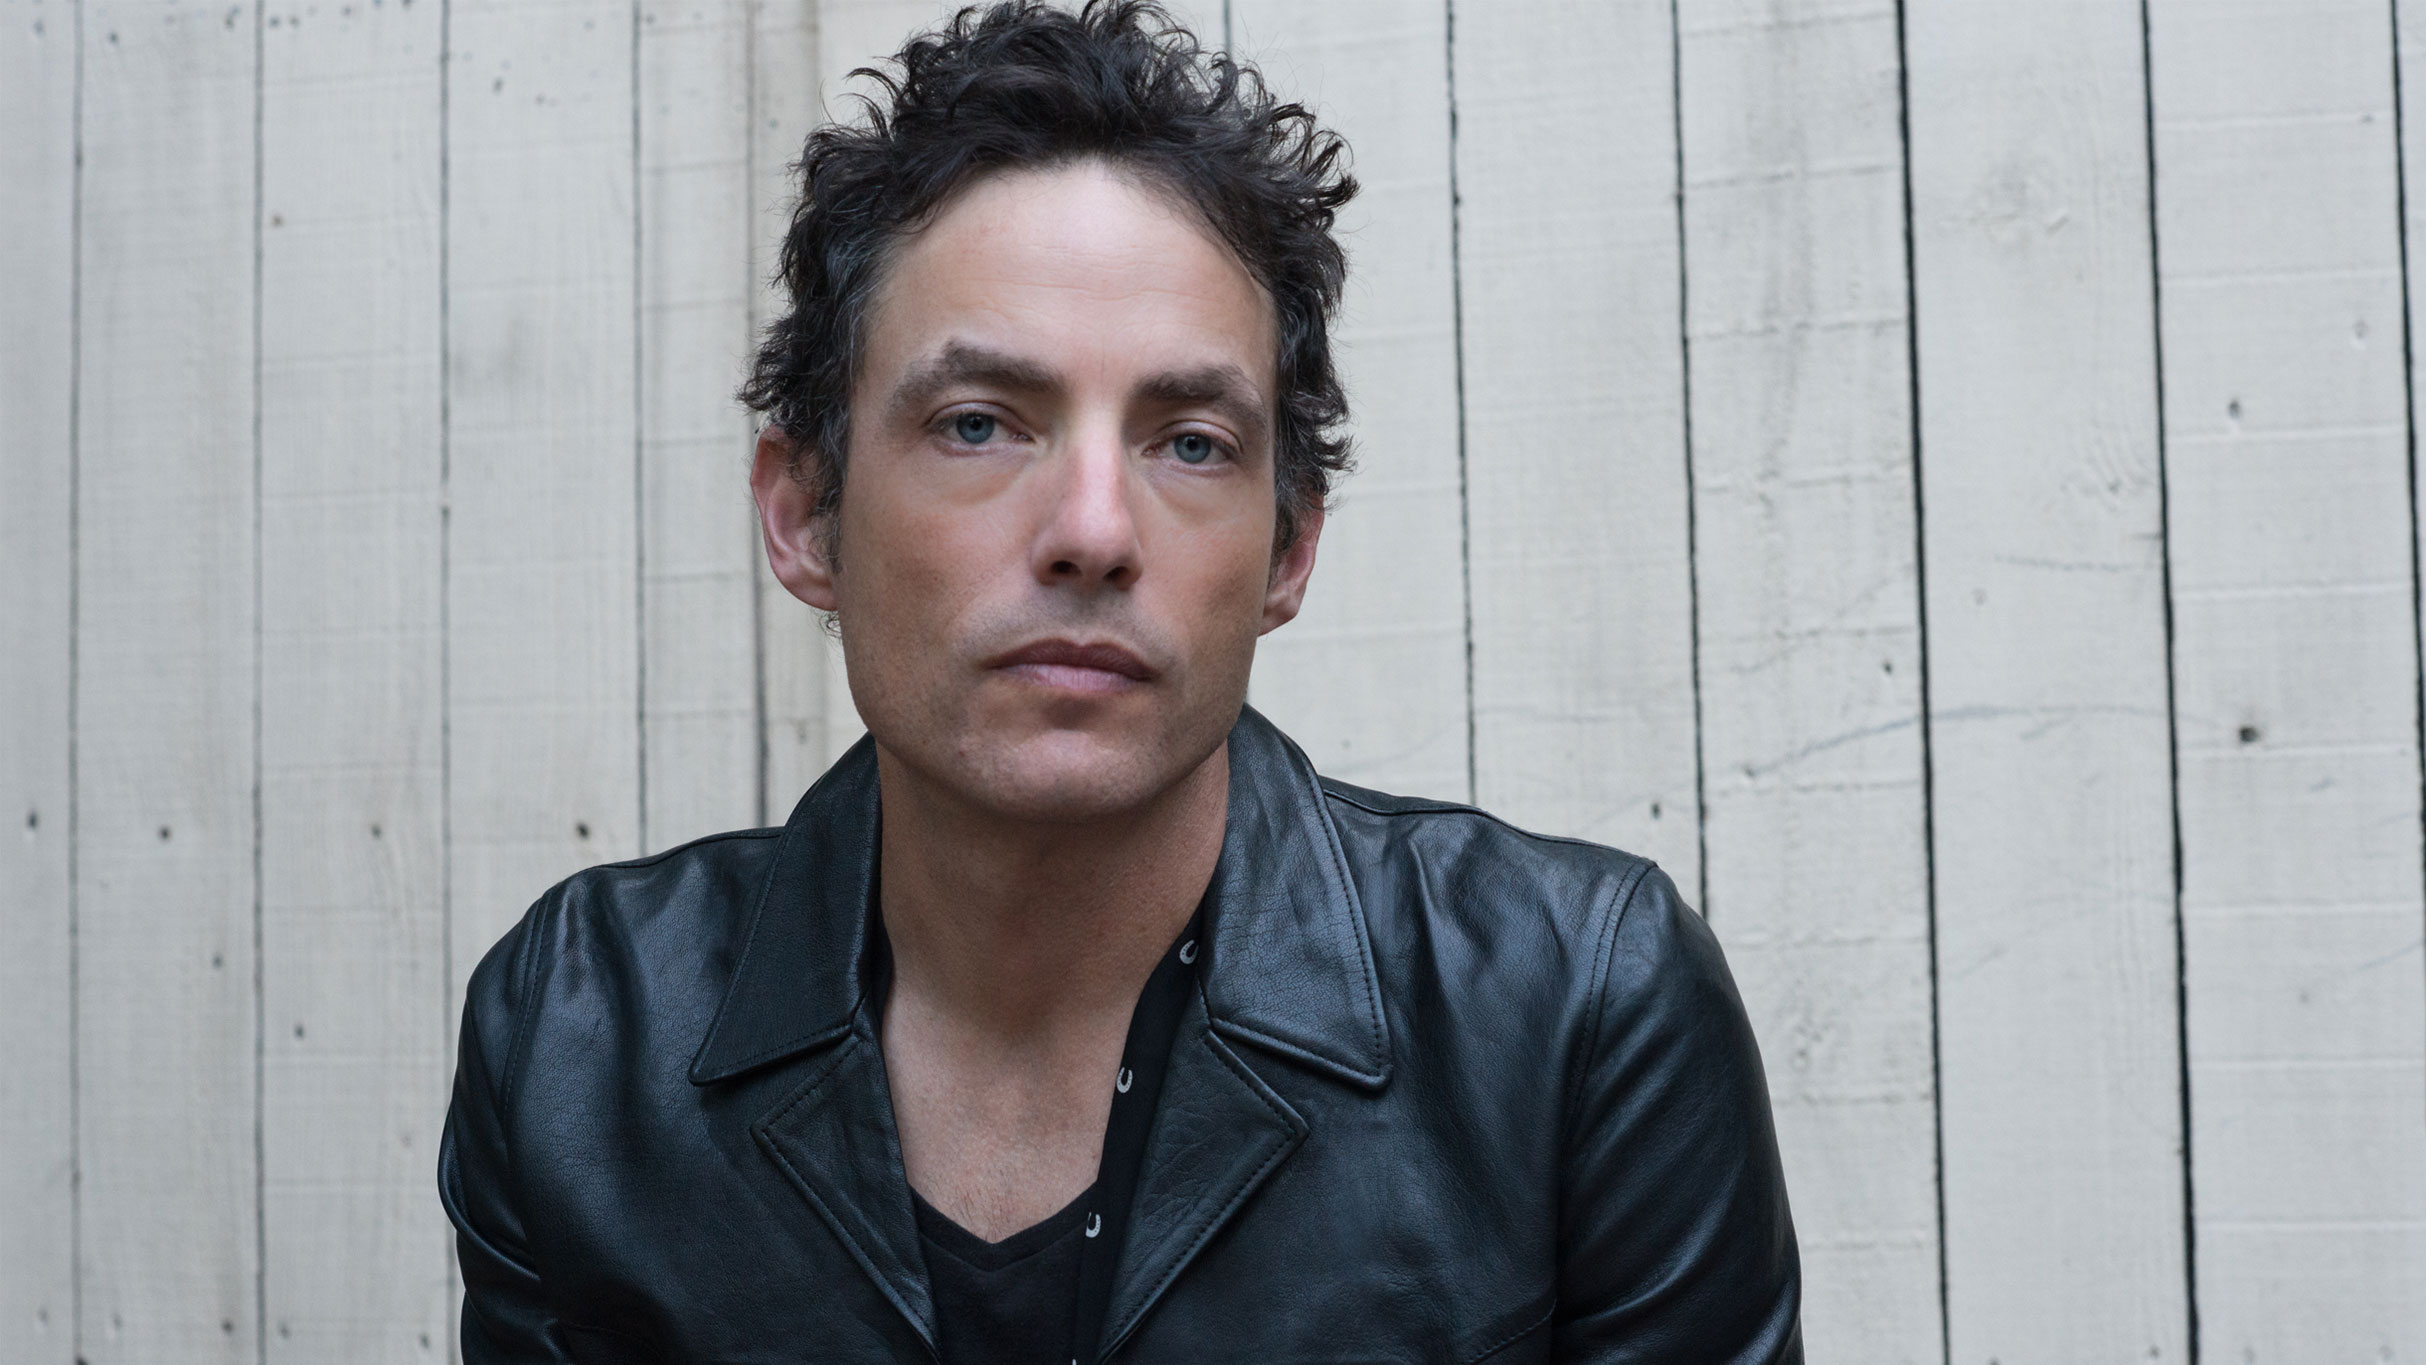 The Wallflowers Perform Bringing Down The Horse & Long After Dark